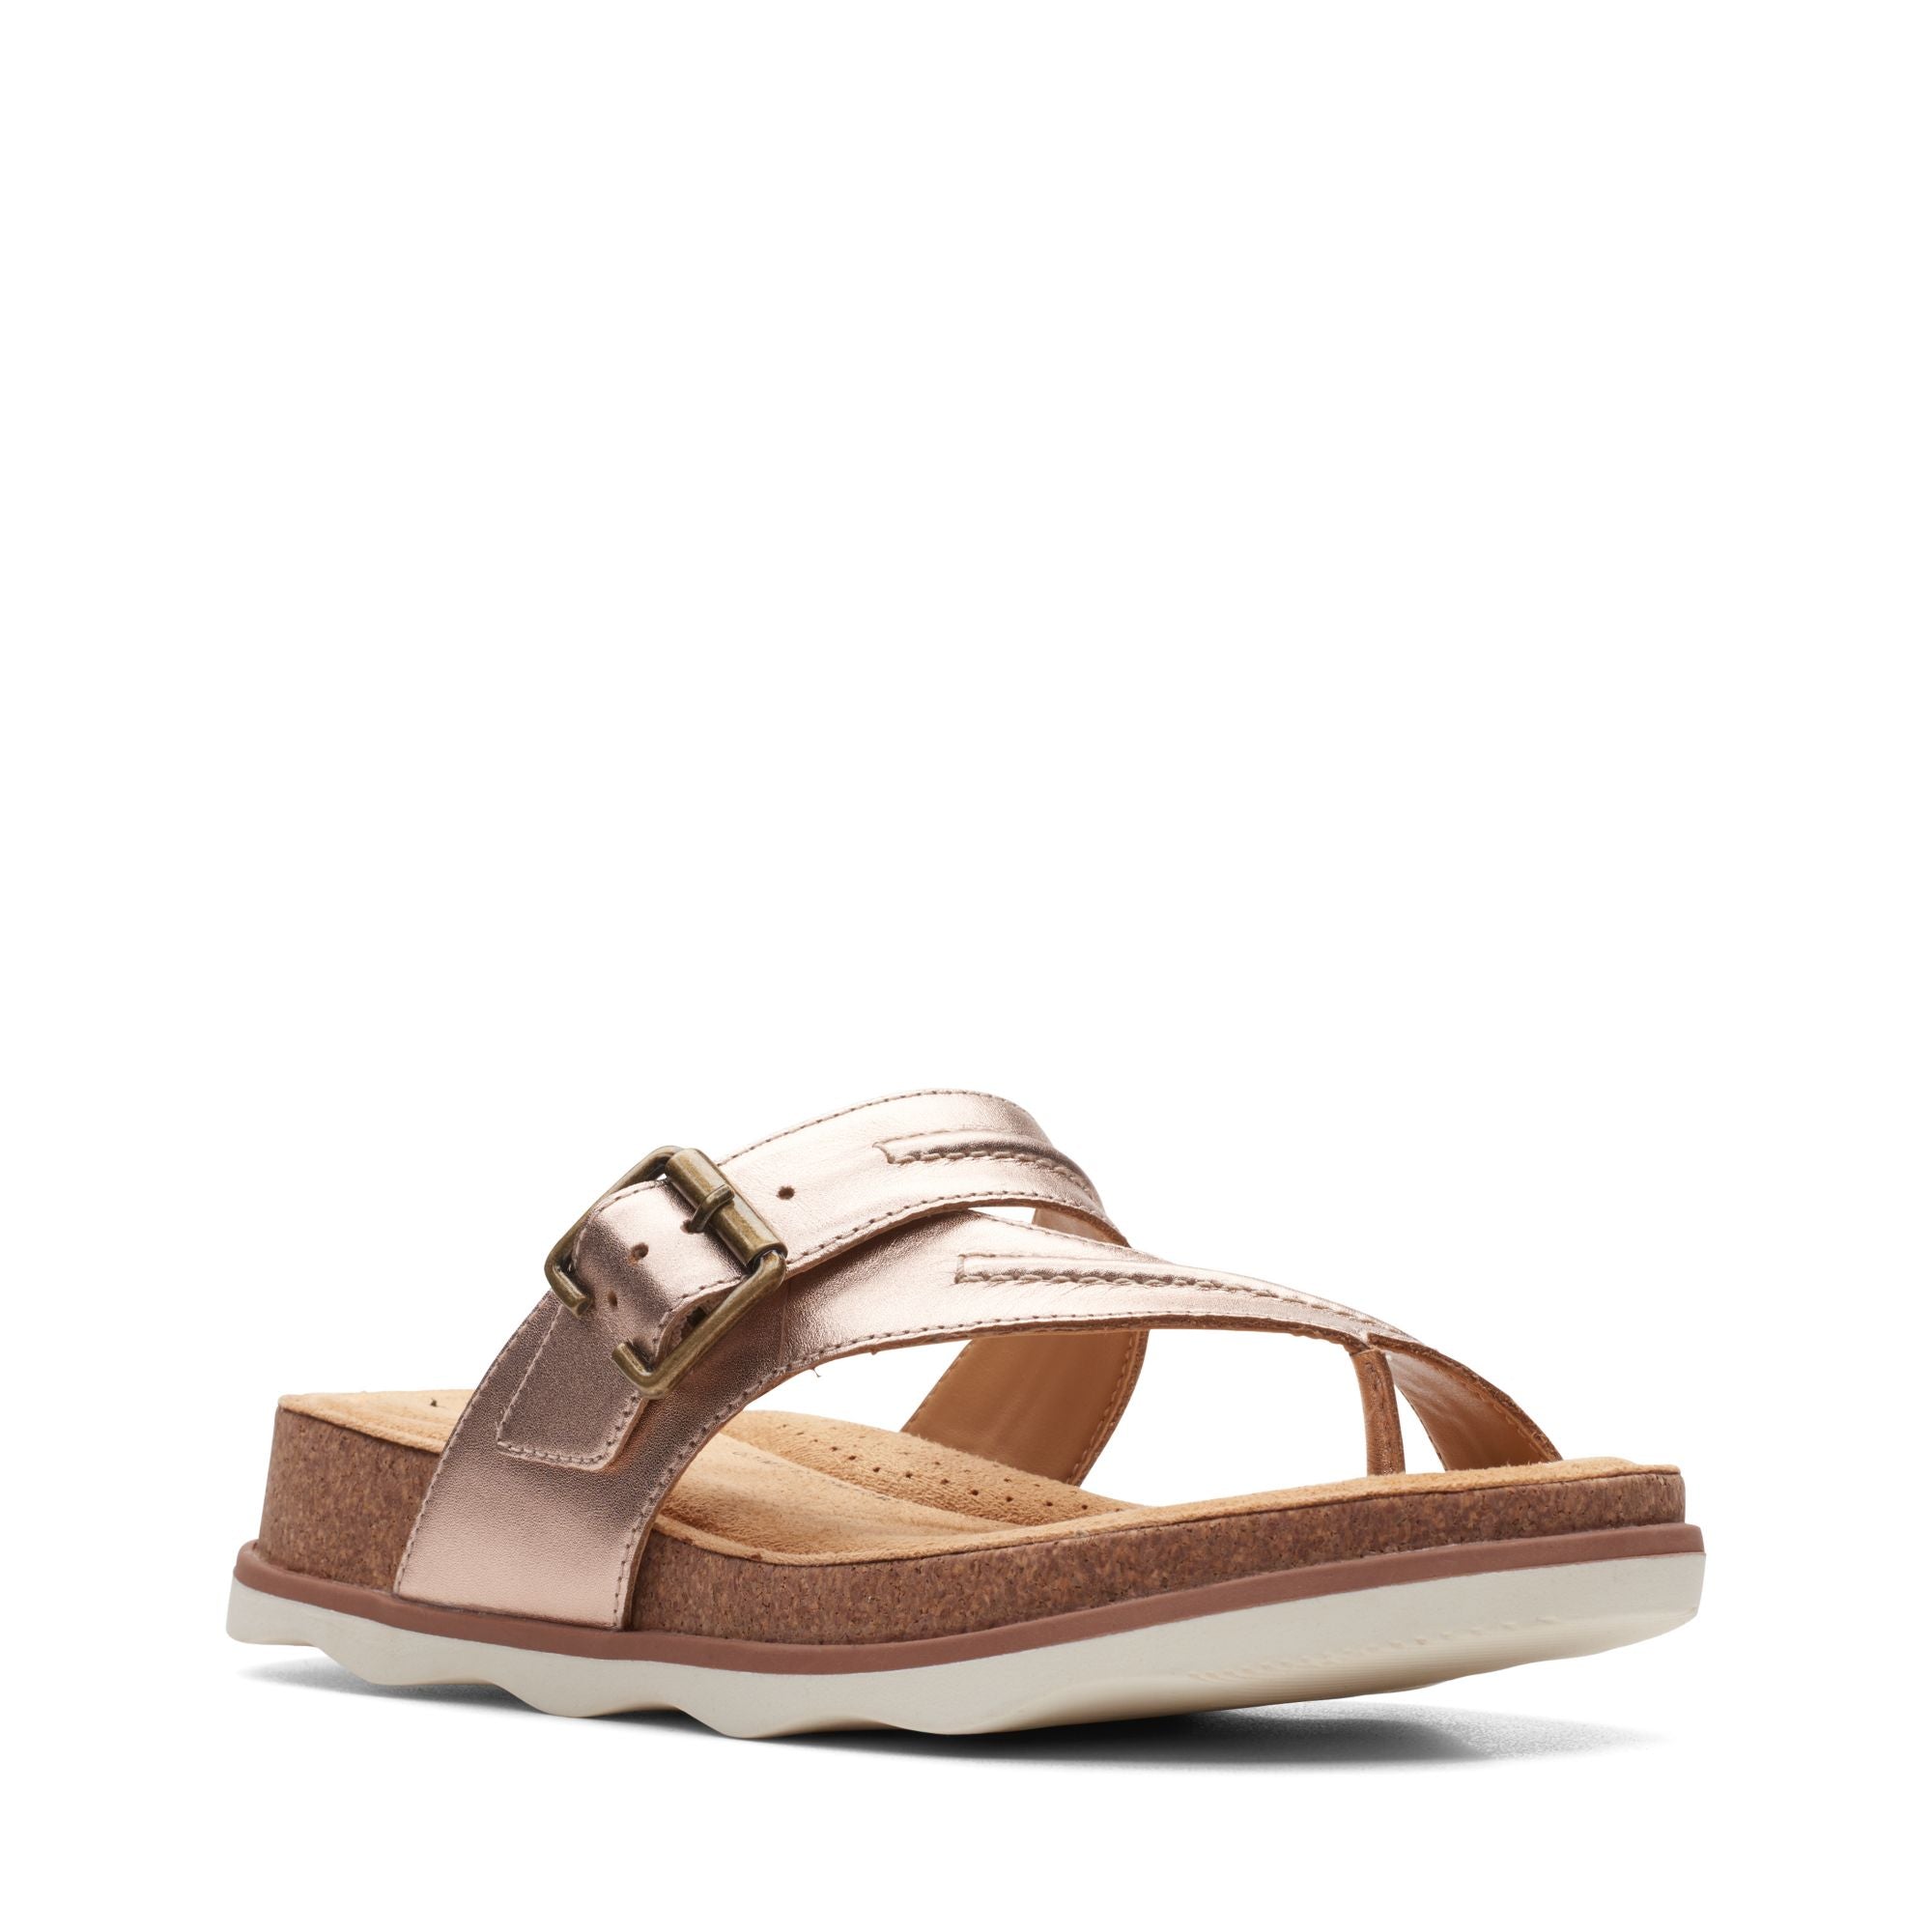 Women's Clarks Brynn Madi Color: Rose Gold Leather